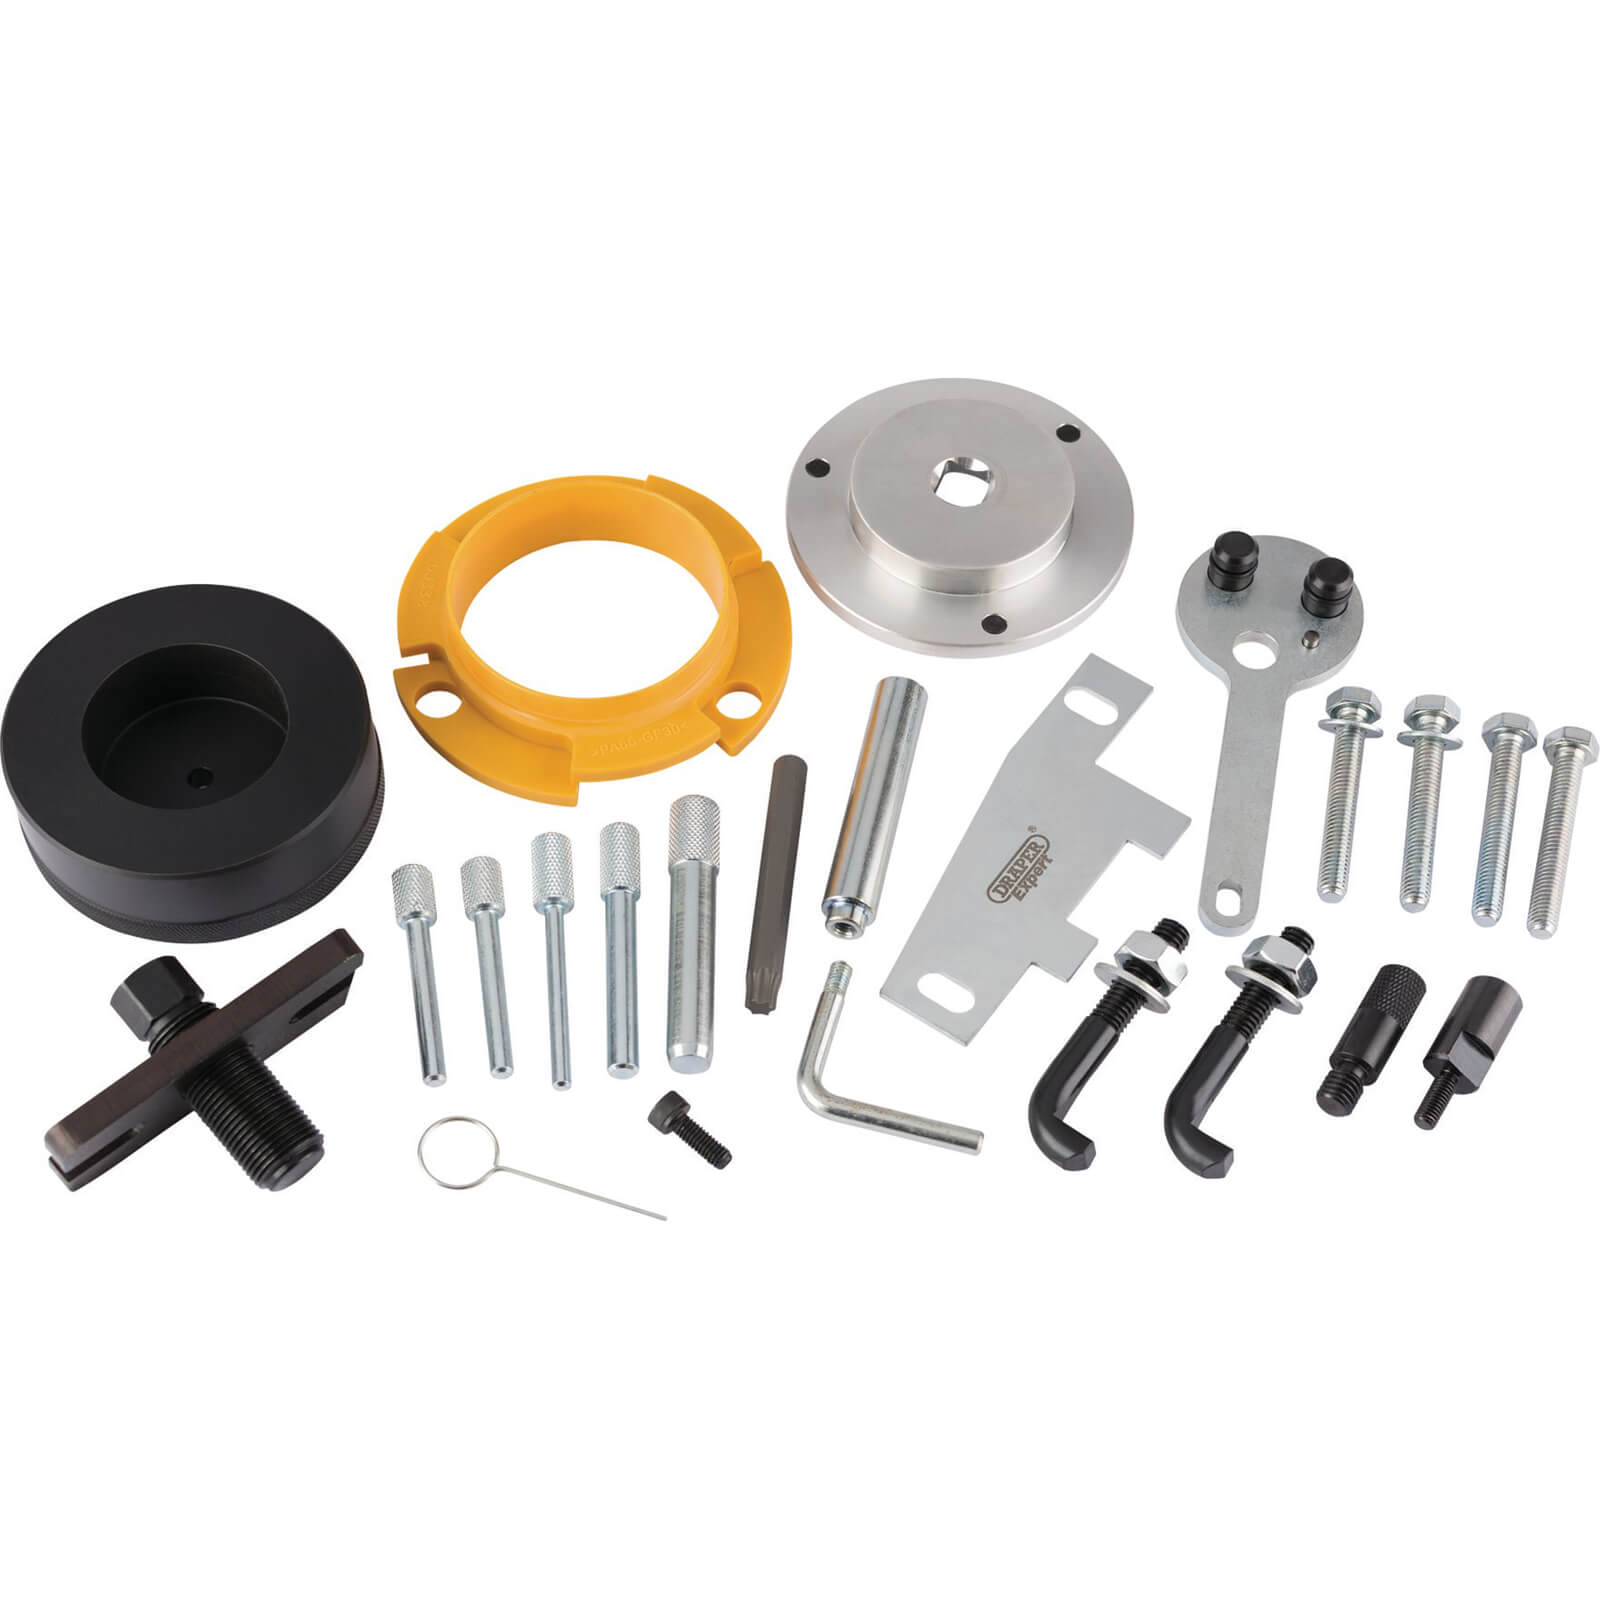 Draper Engine Timing and Overhaul Kit for Ford and Land Rover Vehicles